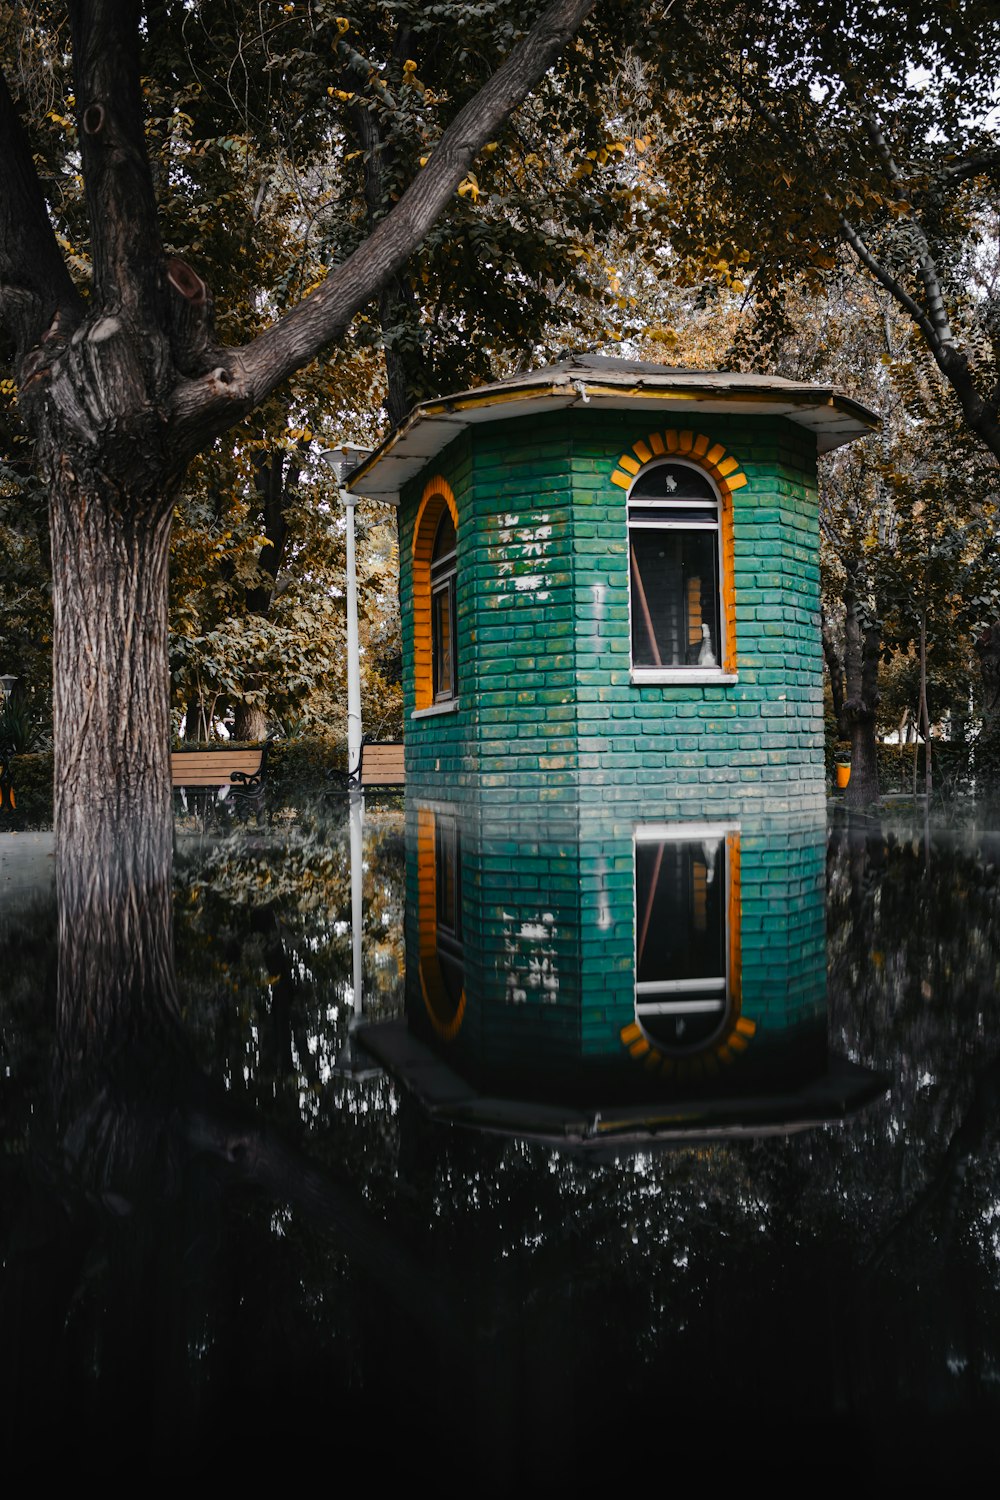 a green house sitting on top of a body of water